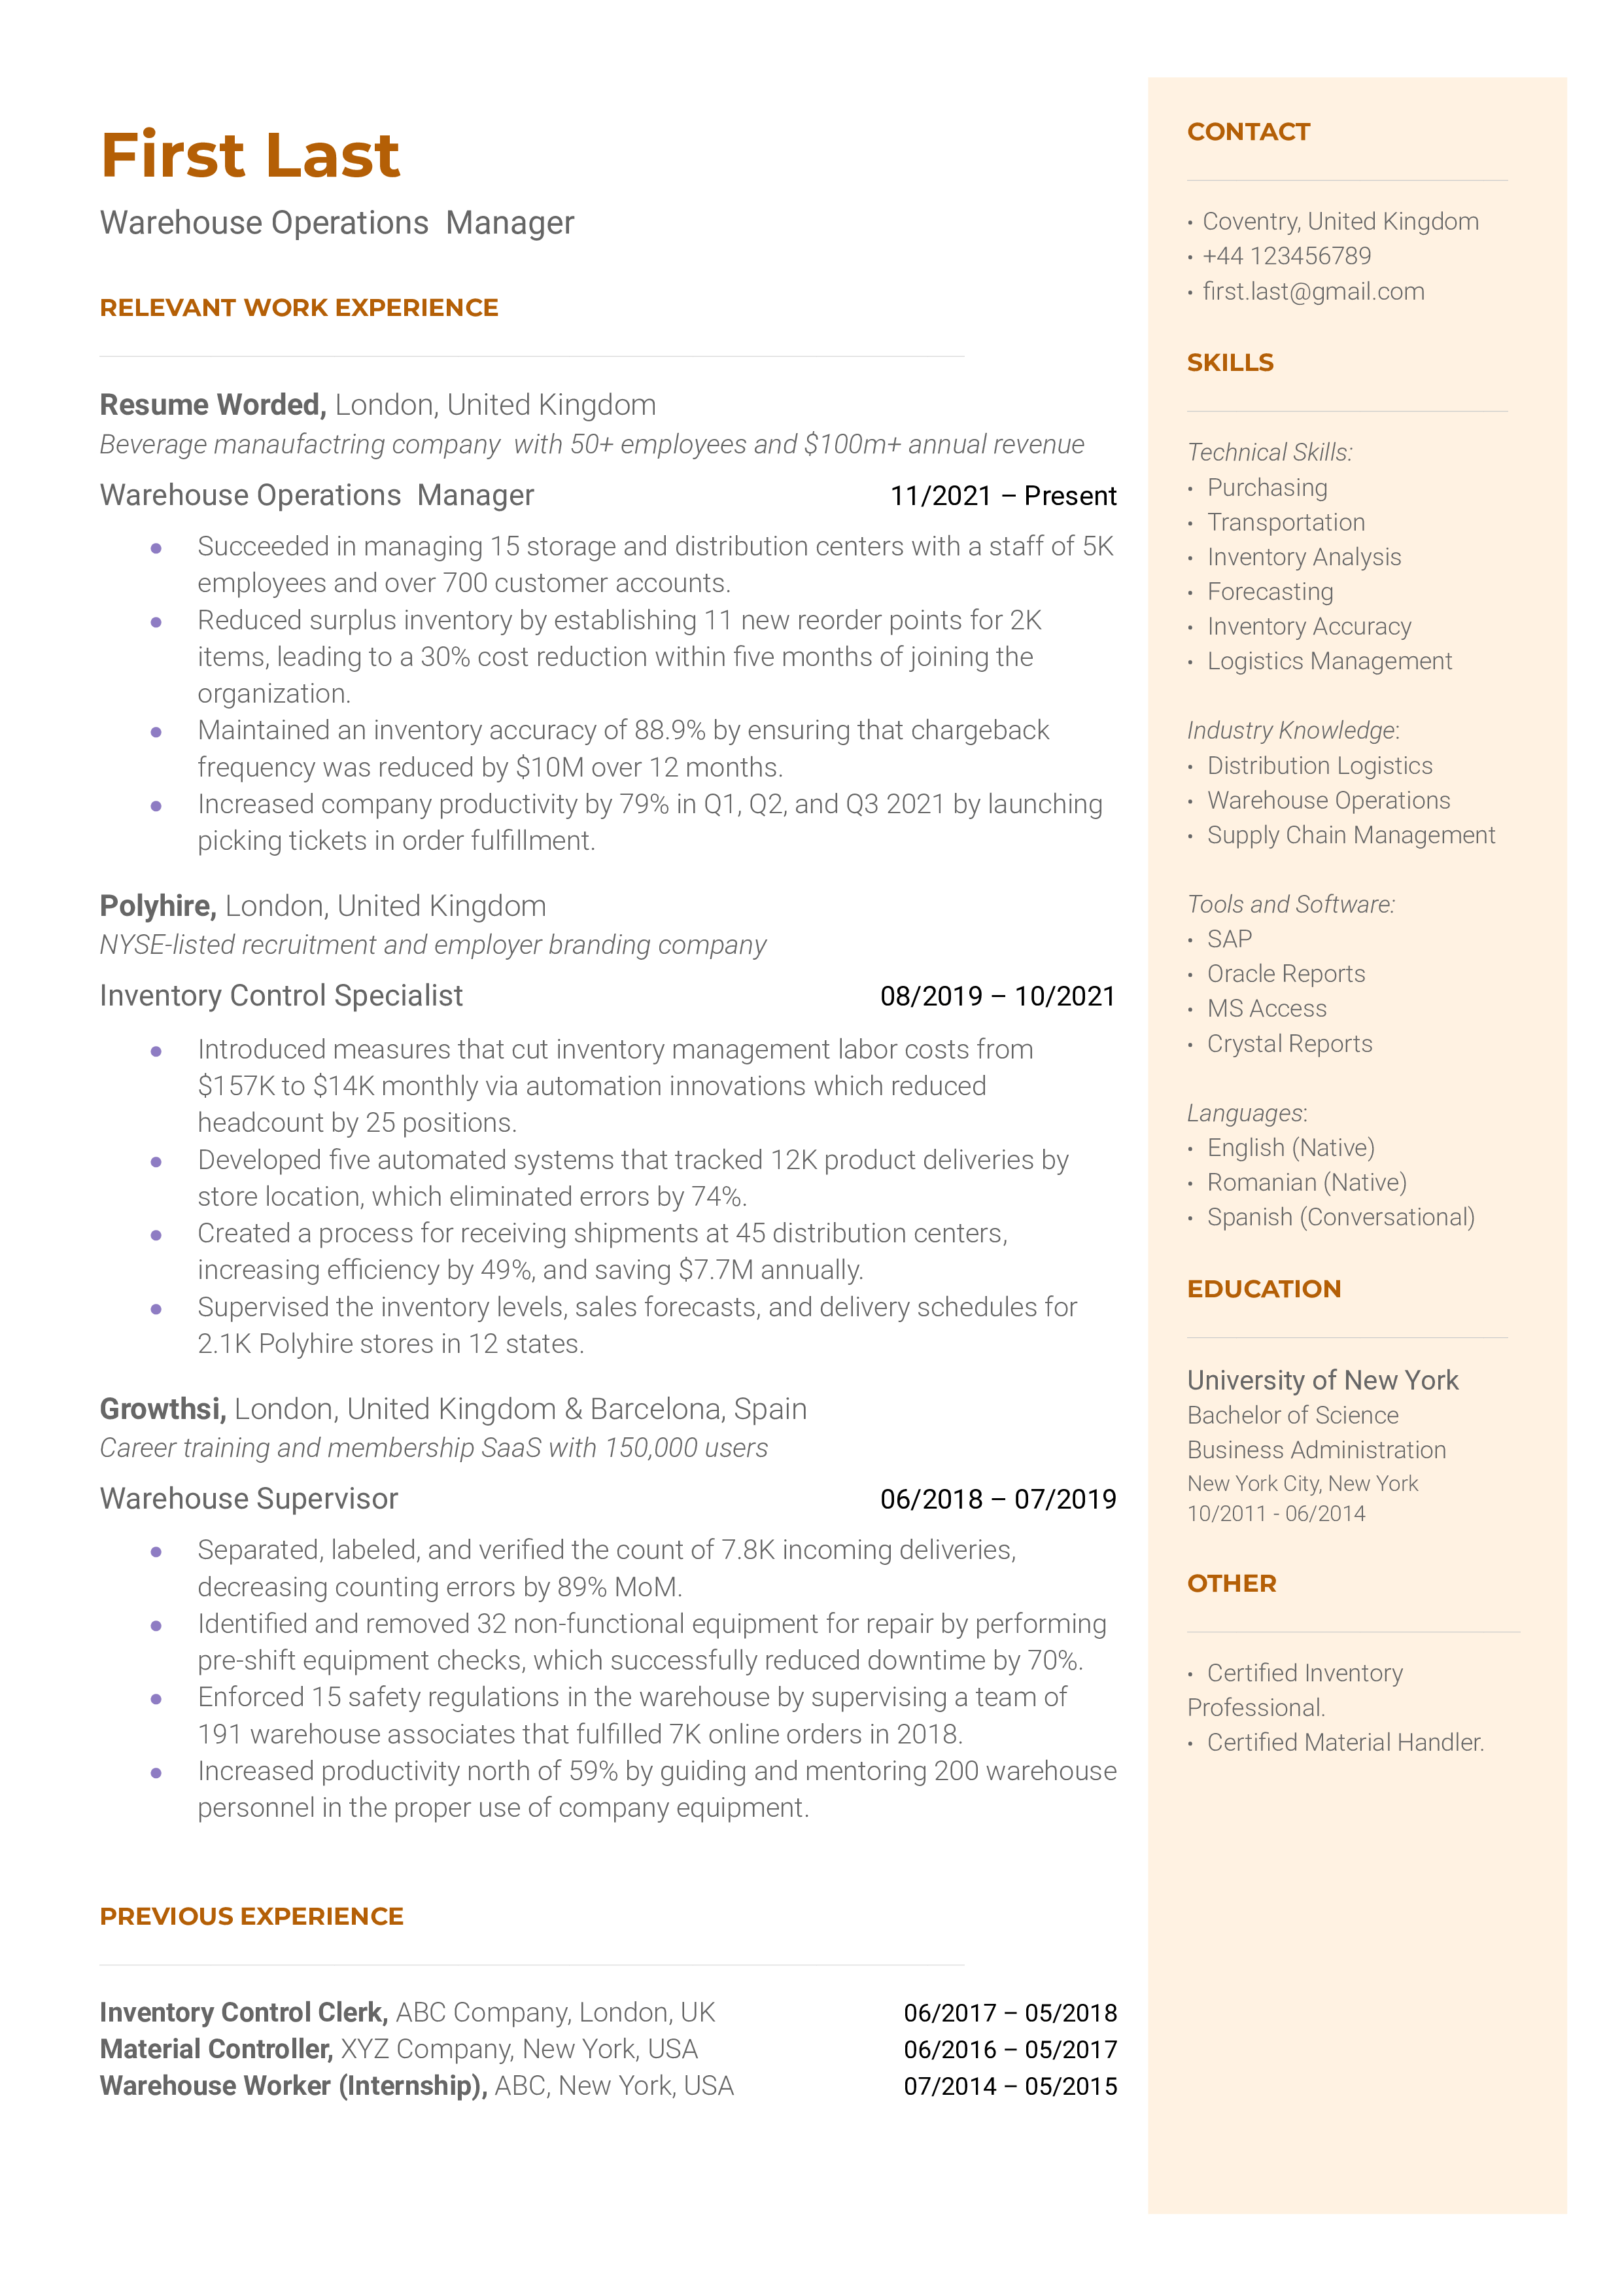 A warehouse operations manager resume example that emphasizes relevant work experience